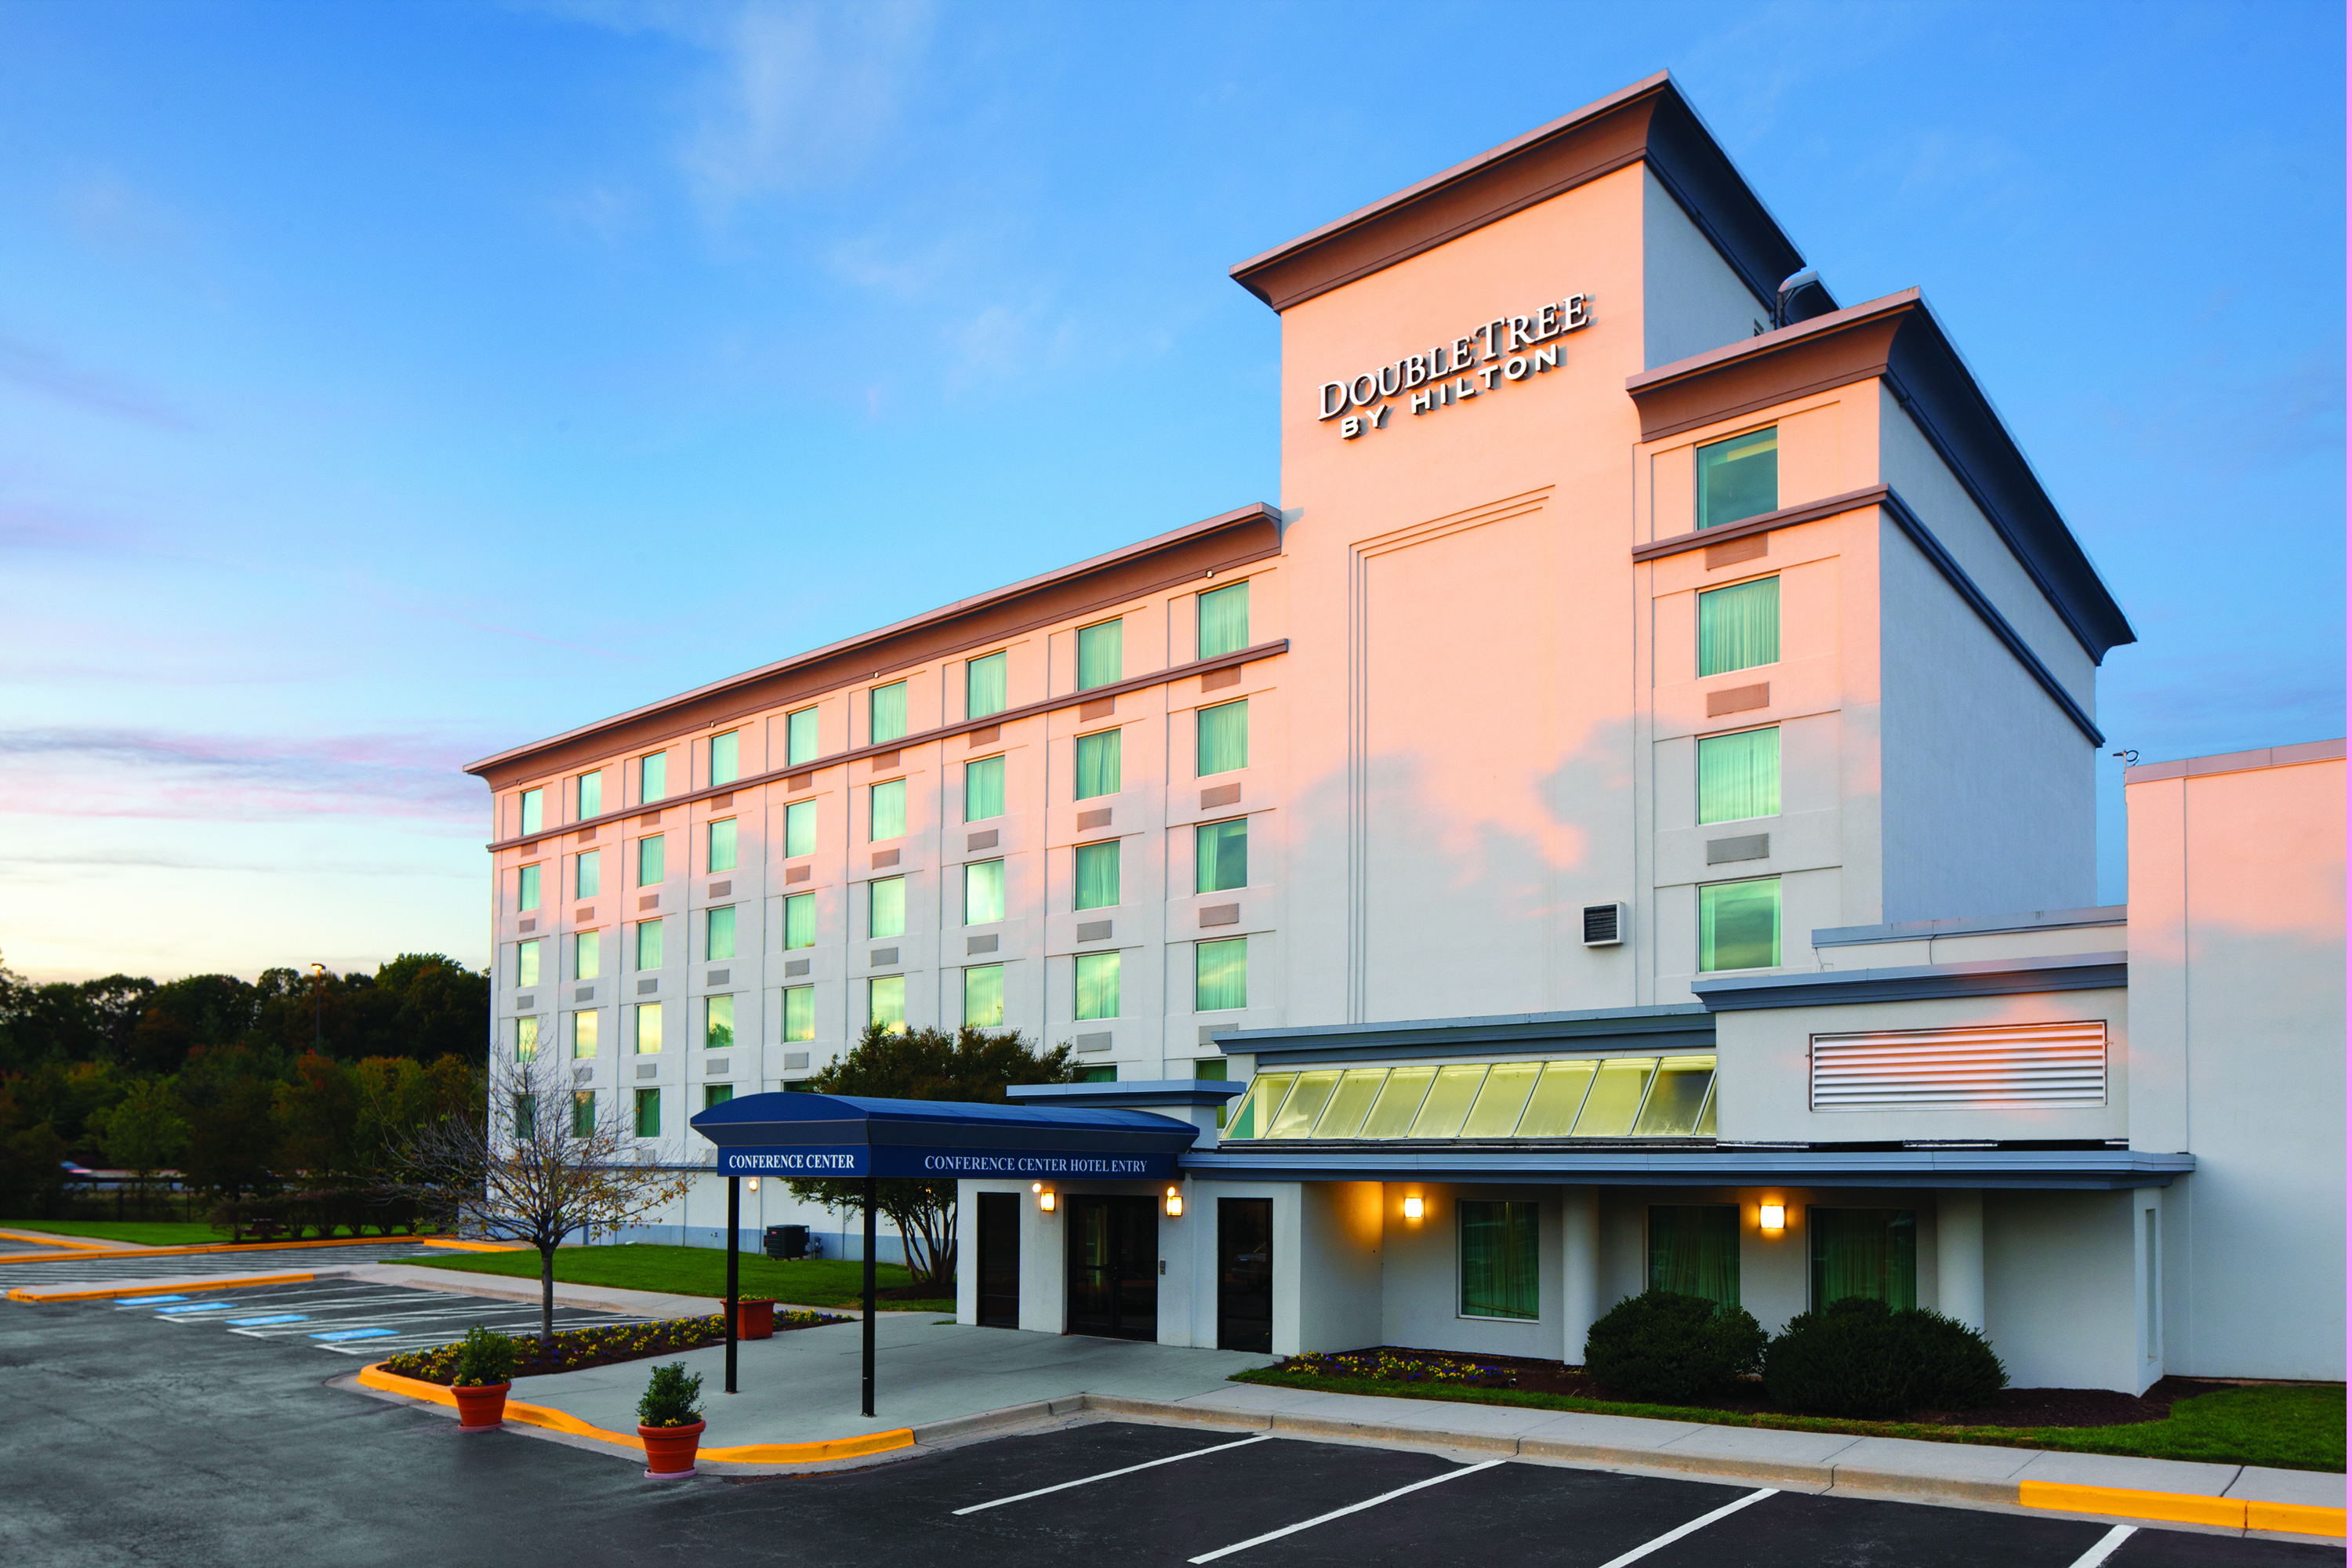 Photo of DoubleTree by Hilton Hotel Annapolis, Annapolis, MD